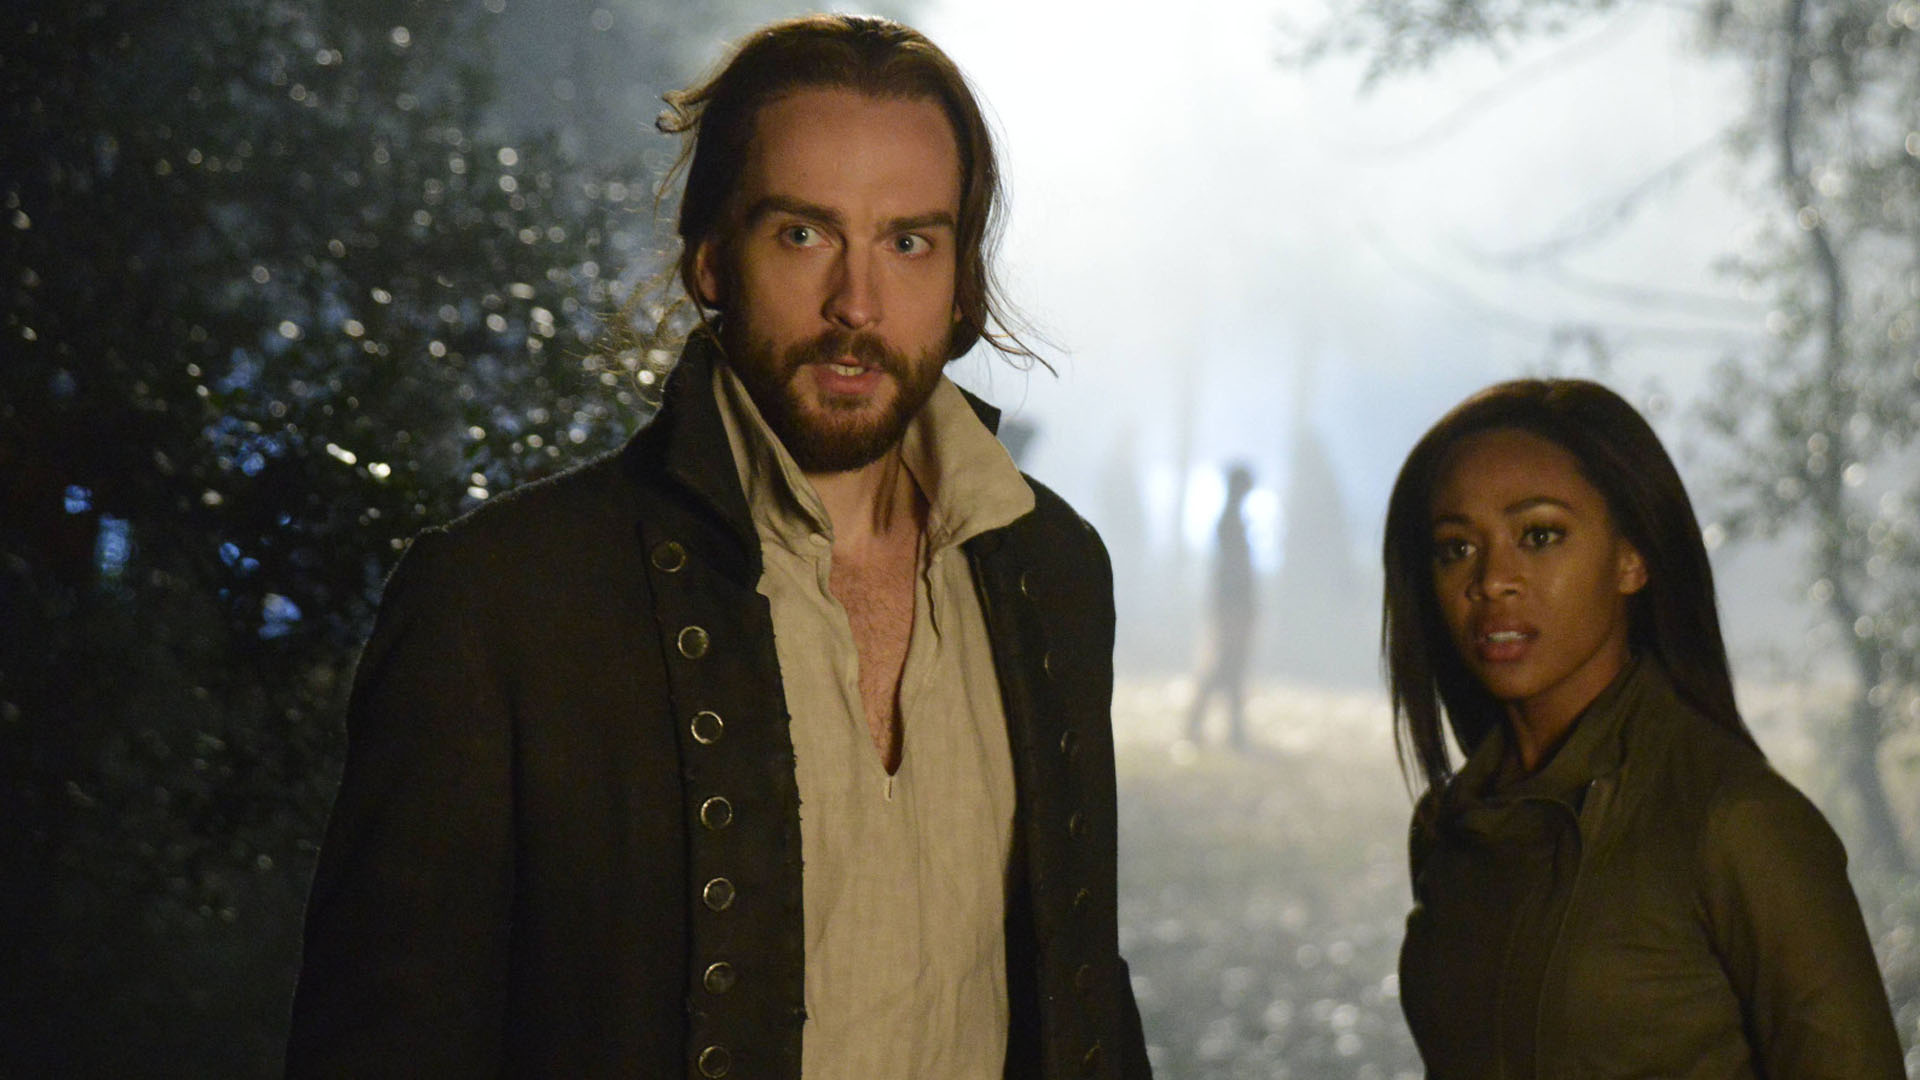 Sleepy Hollow finale, Unexpected twists, Tom Mison teases, Exciting ending, 1920x1080 Full HD Desktop